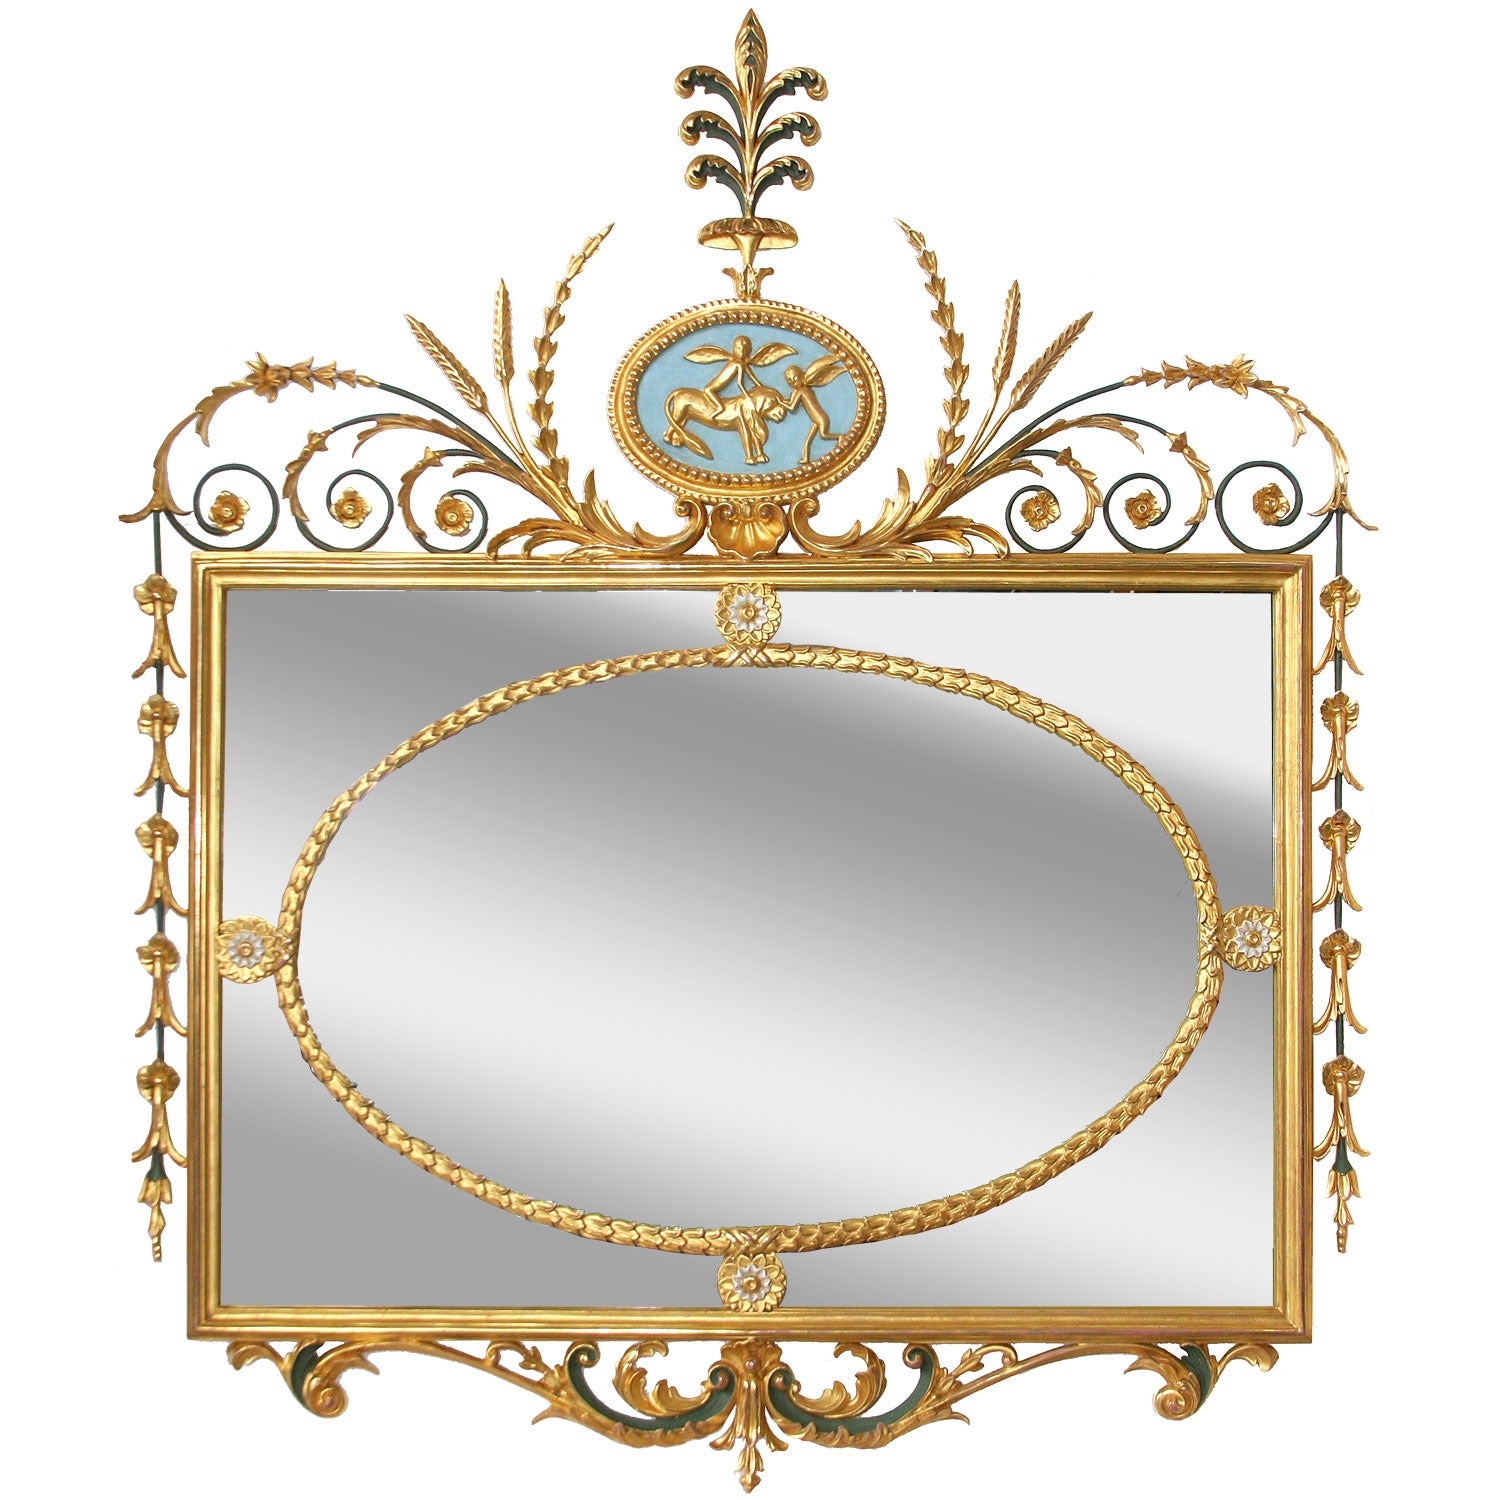 Bespoke Water Gilded and Painted Wall Mirror